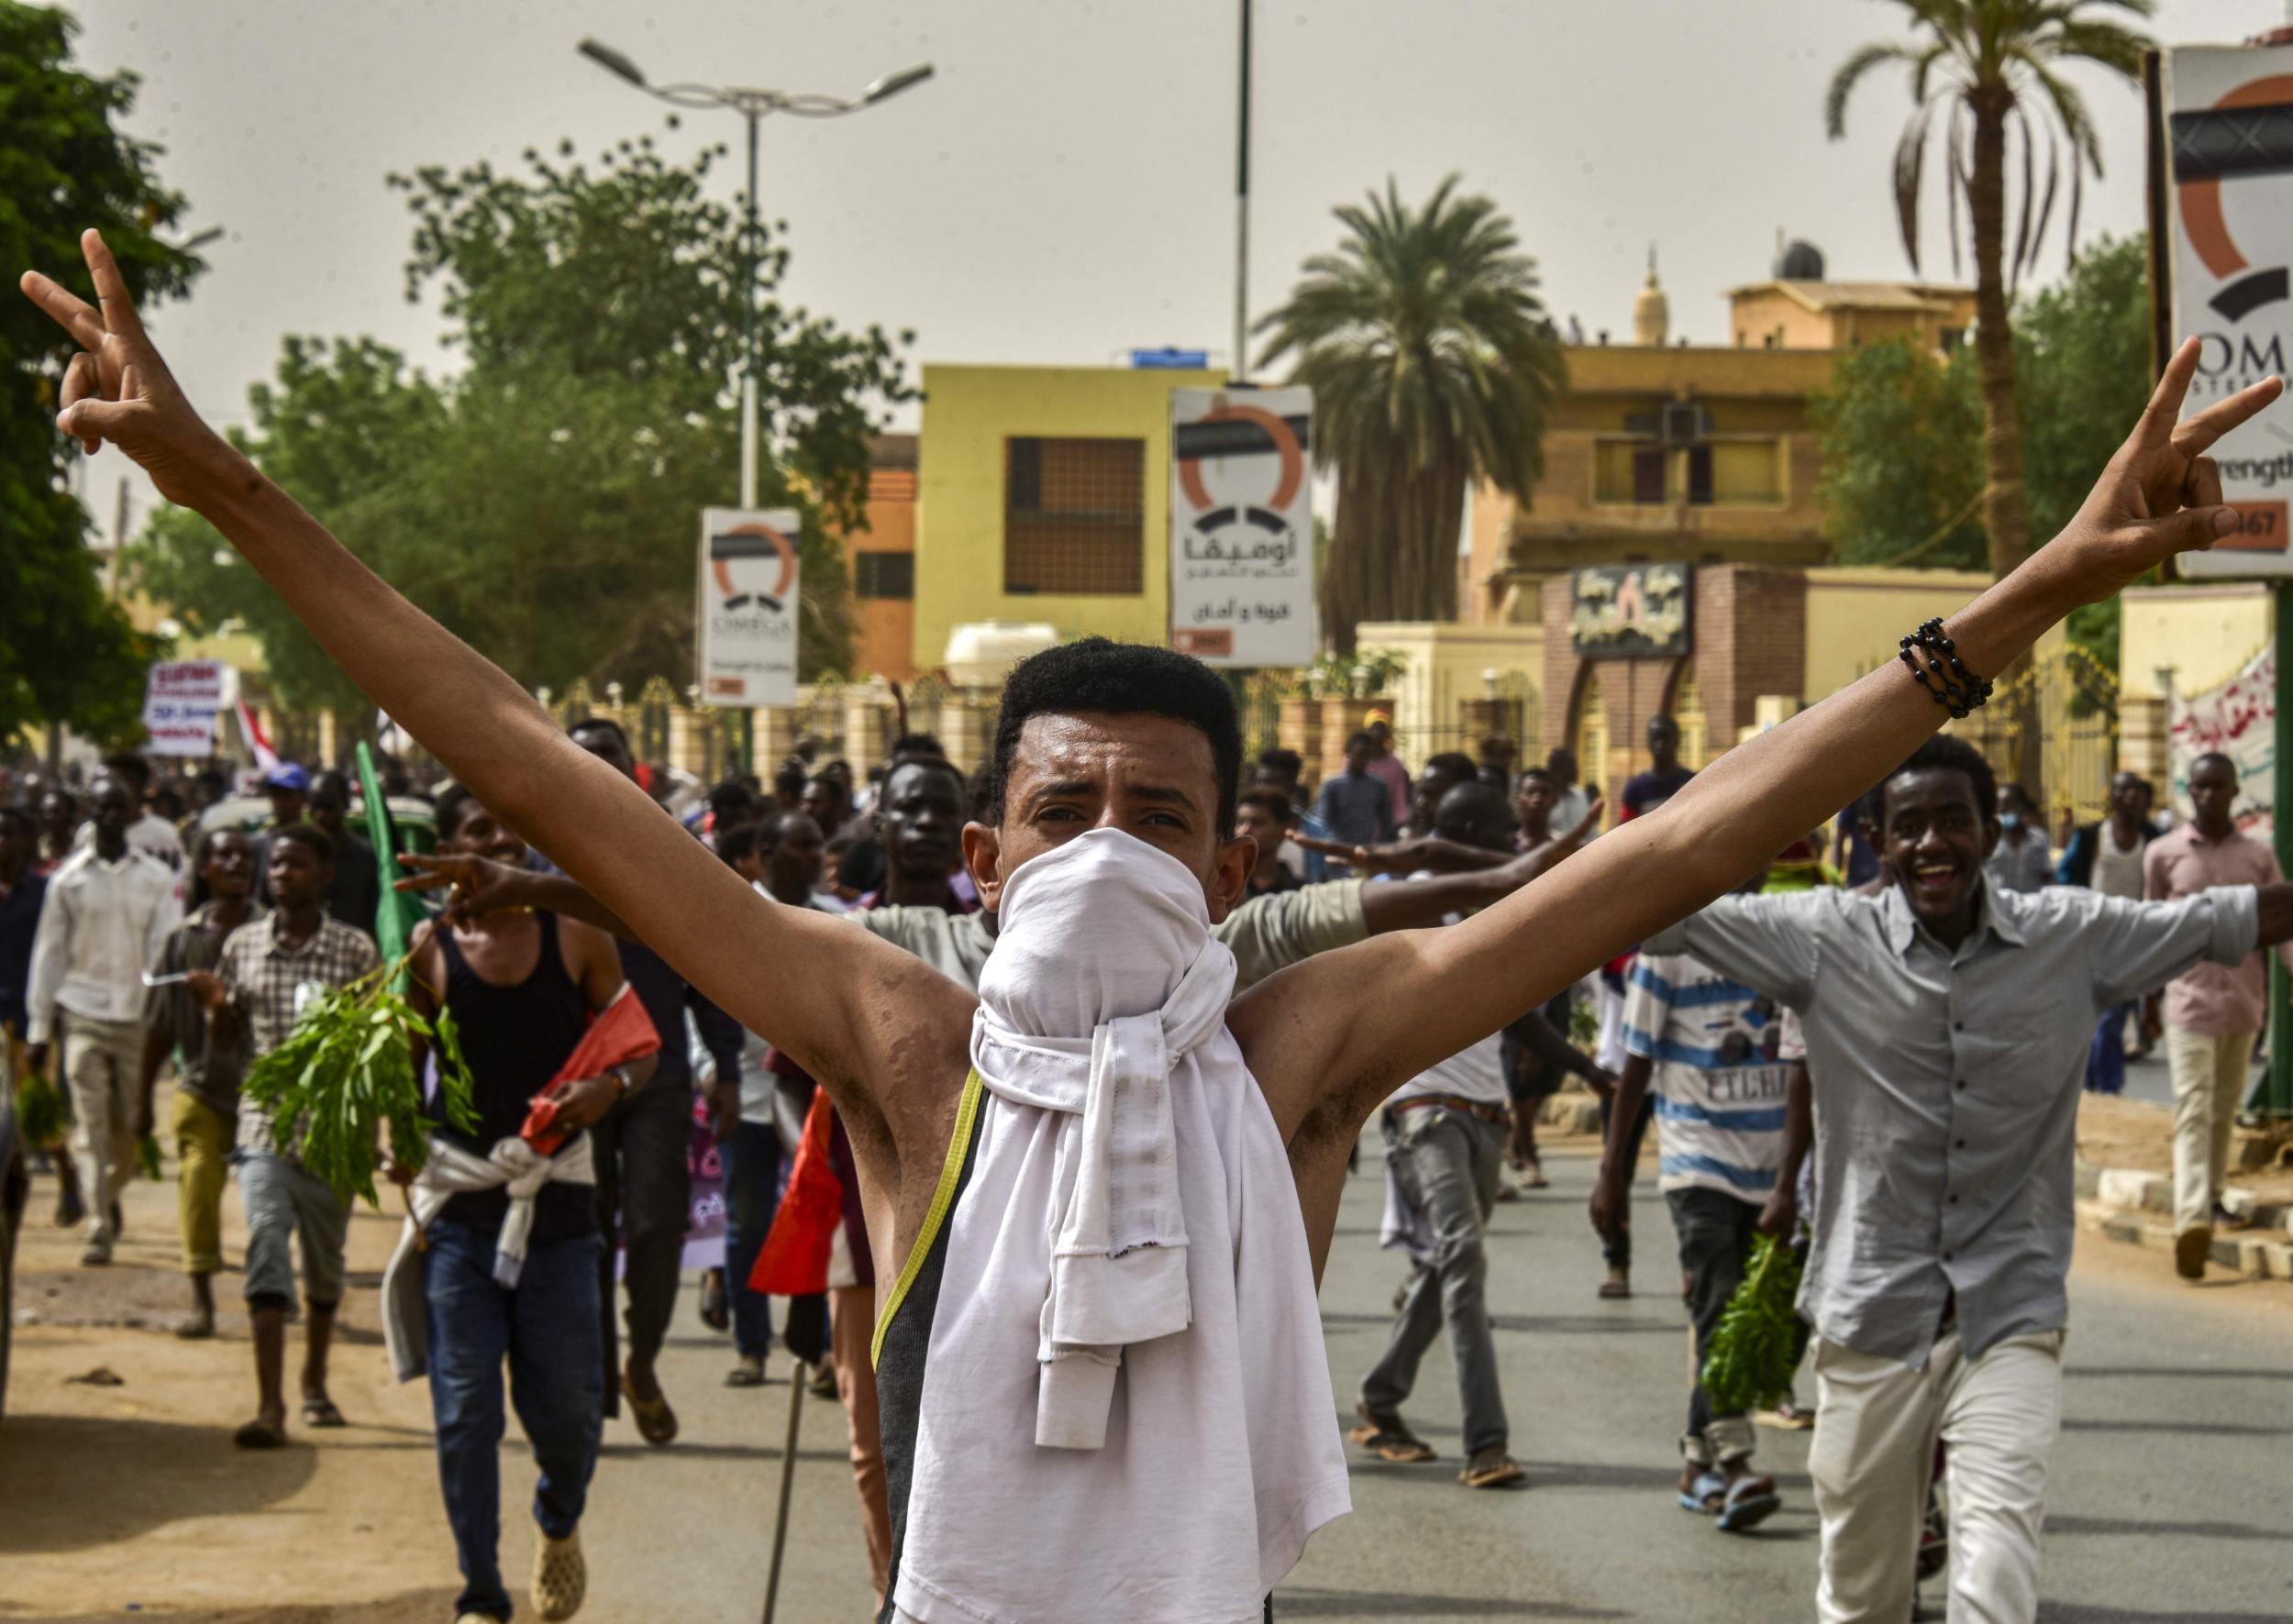 A Sudanese protester flashes a victory sign while marching with others in a mass demonstration against the country's ruling generals in Omdurman on June 30